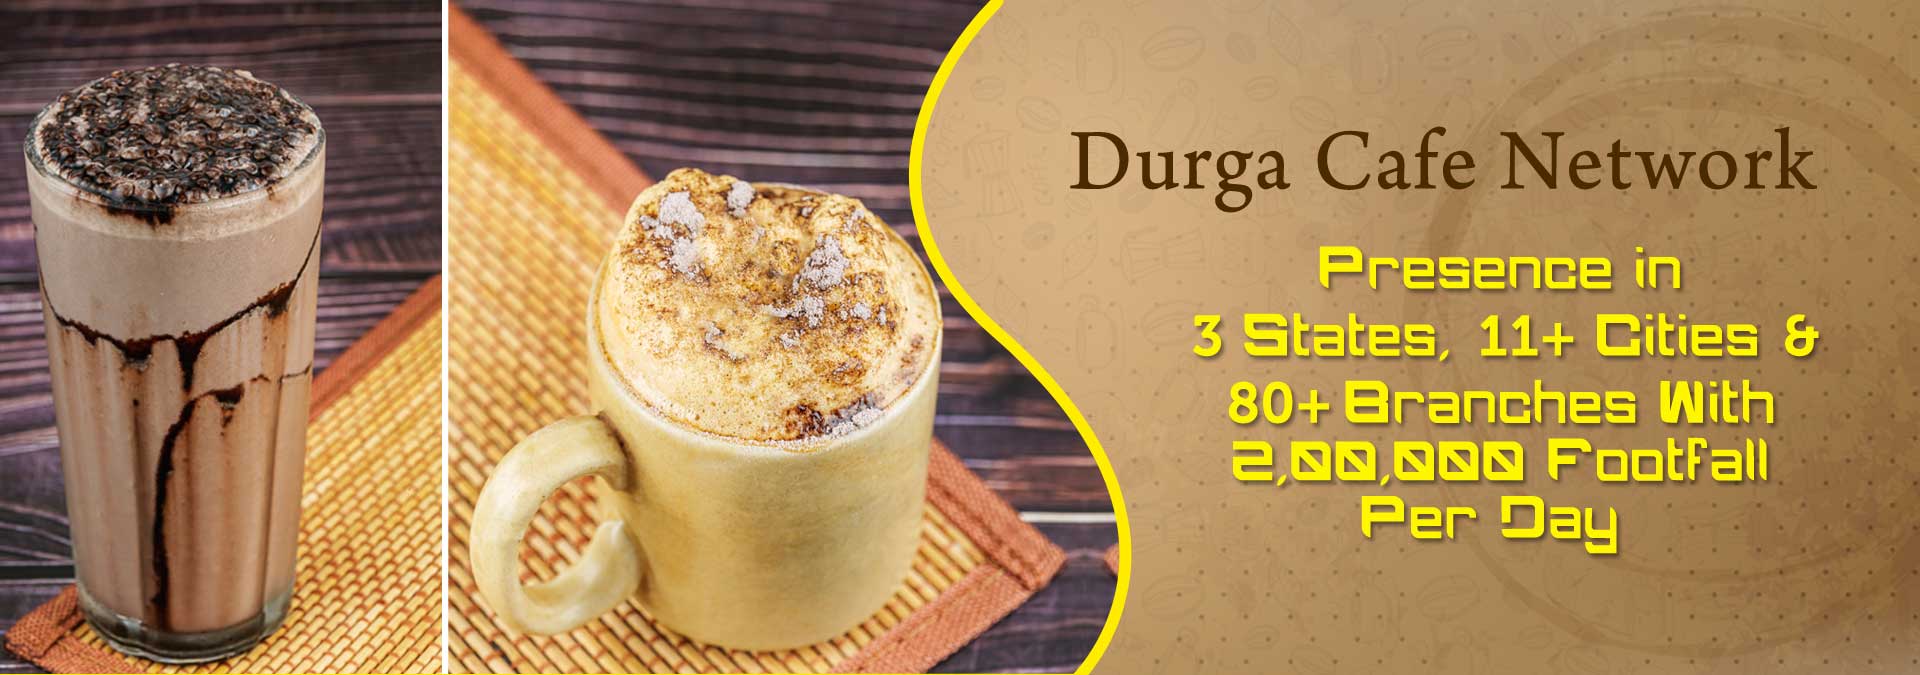 official franchise of cafe durga, contact Shashank Mengade for official franchise of cafe durga